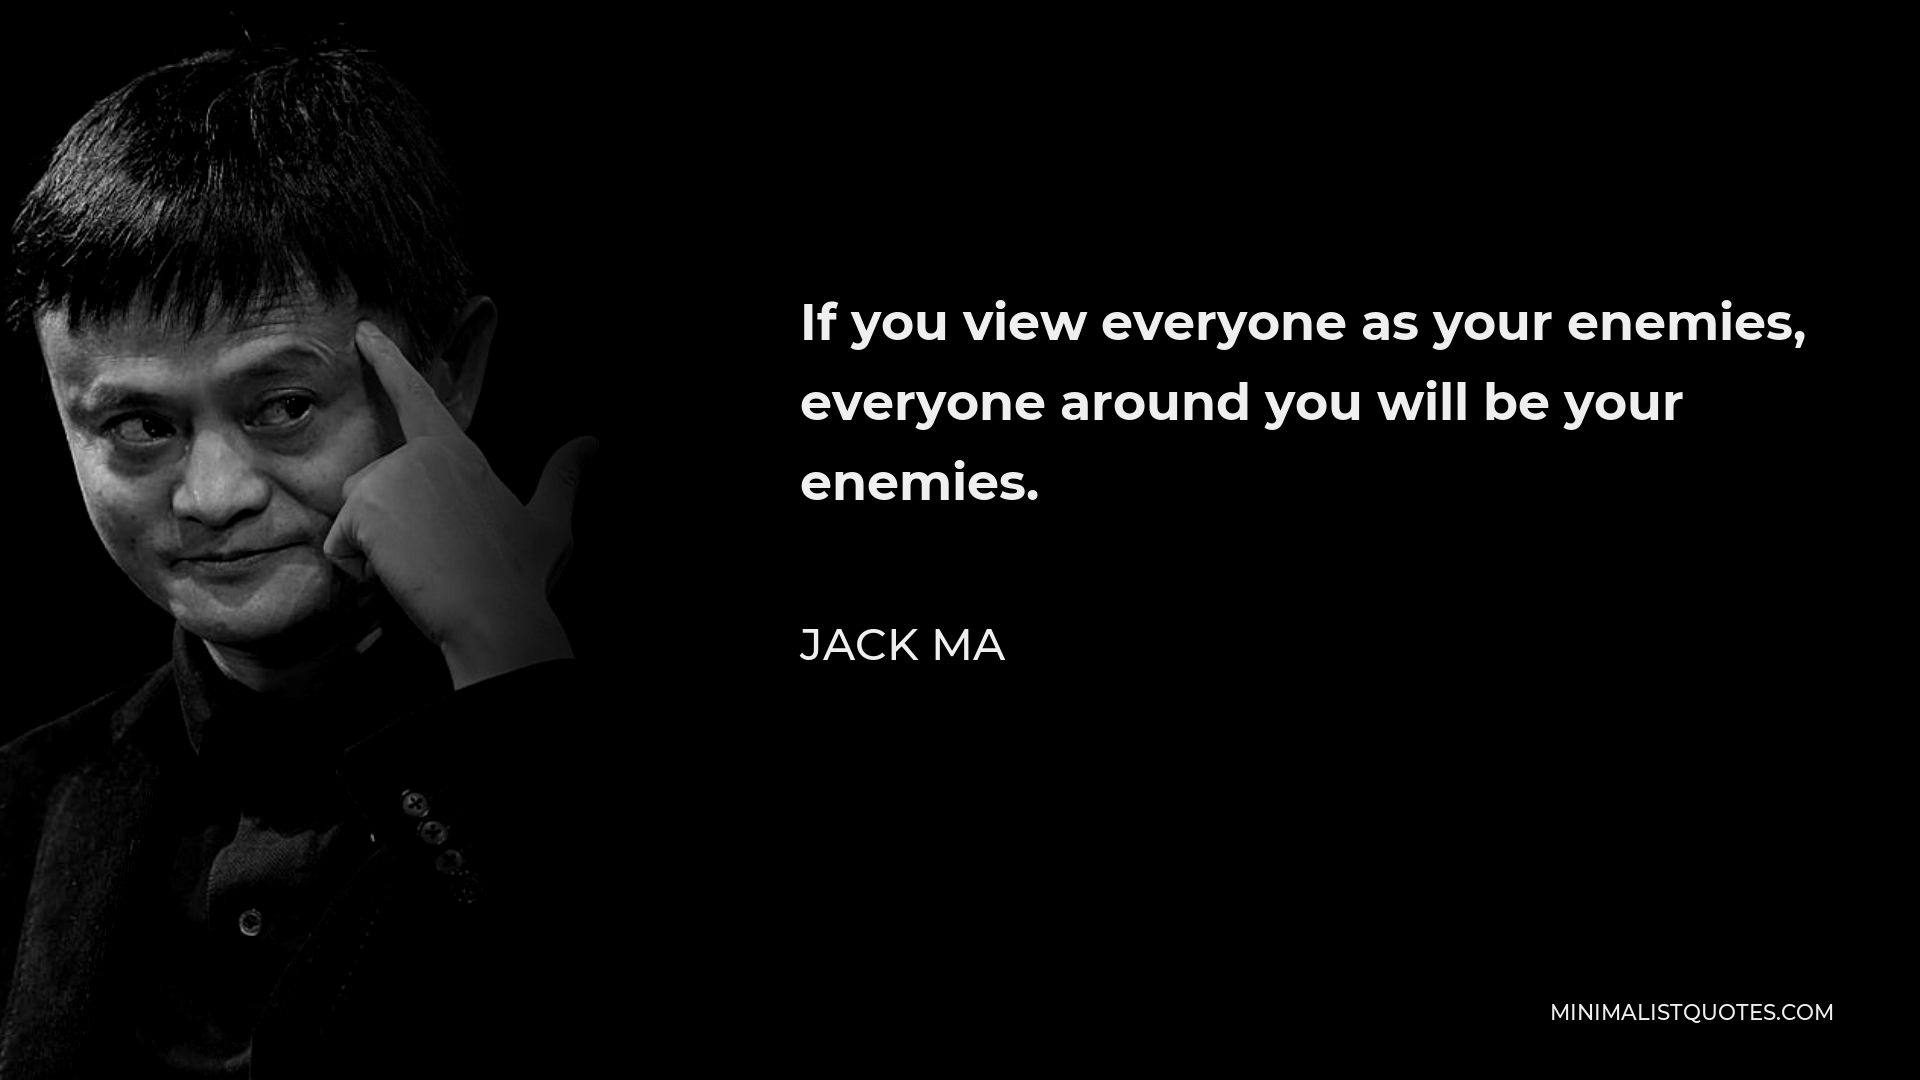 Jack Ma Quote - If you view everyone as your enemies, everyone around you will be your enemies.